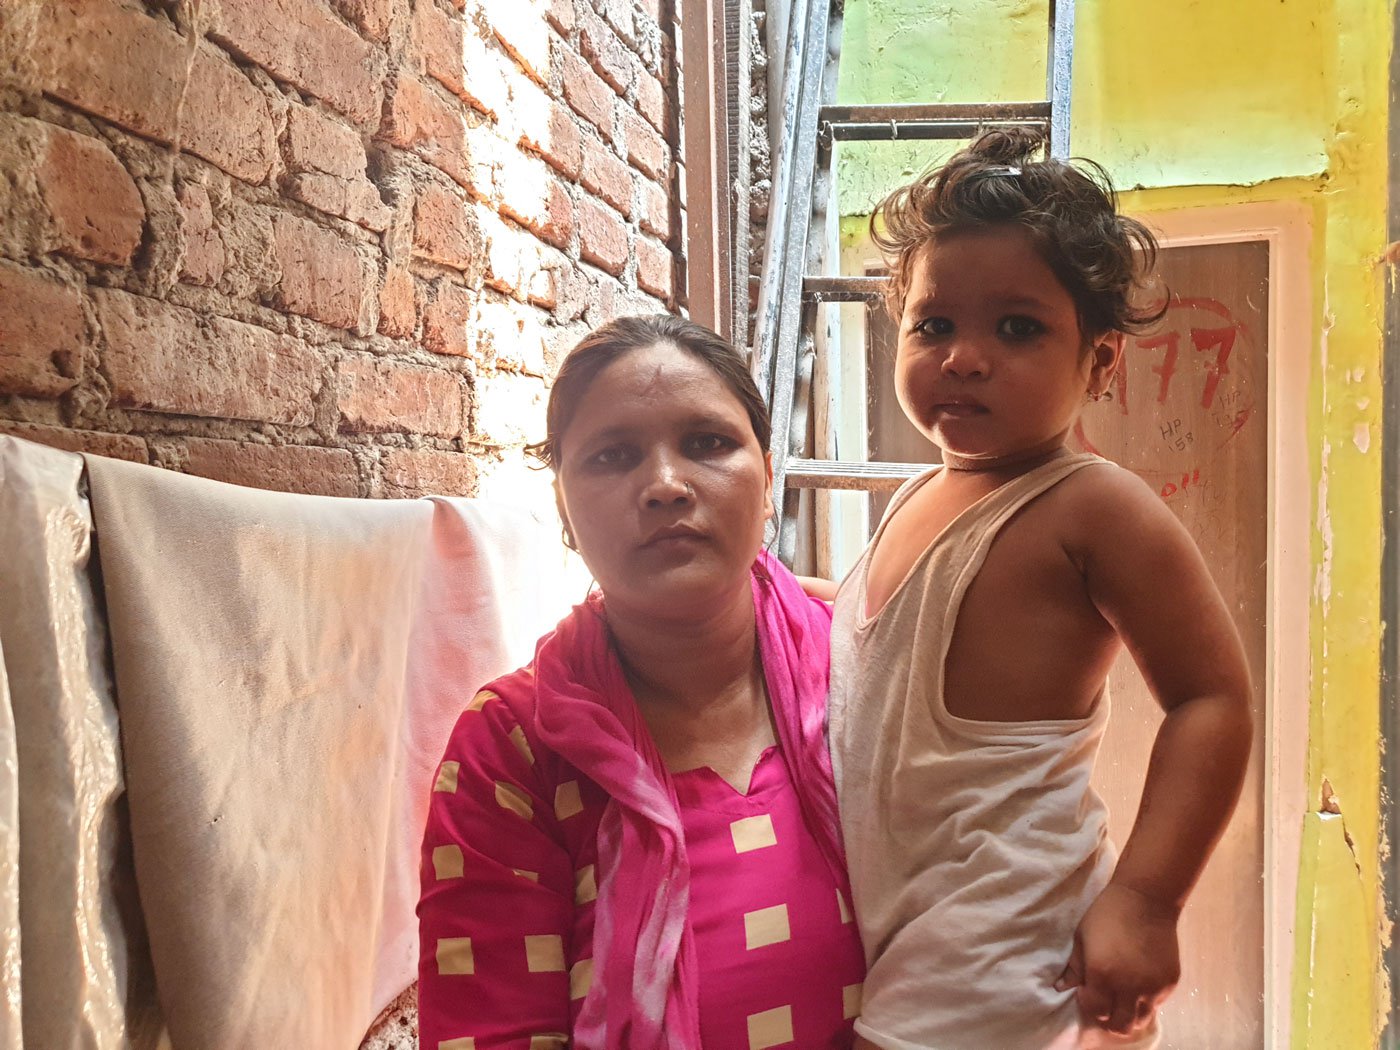 Moninissa and her family are also planning to return to their village in Faizabad district. Her husband lost a job as a packer in a garment factory during the 2020 lockdown, and has now once again lost his job as a driver